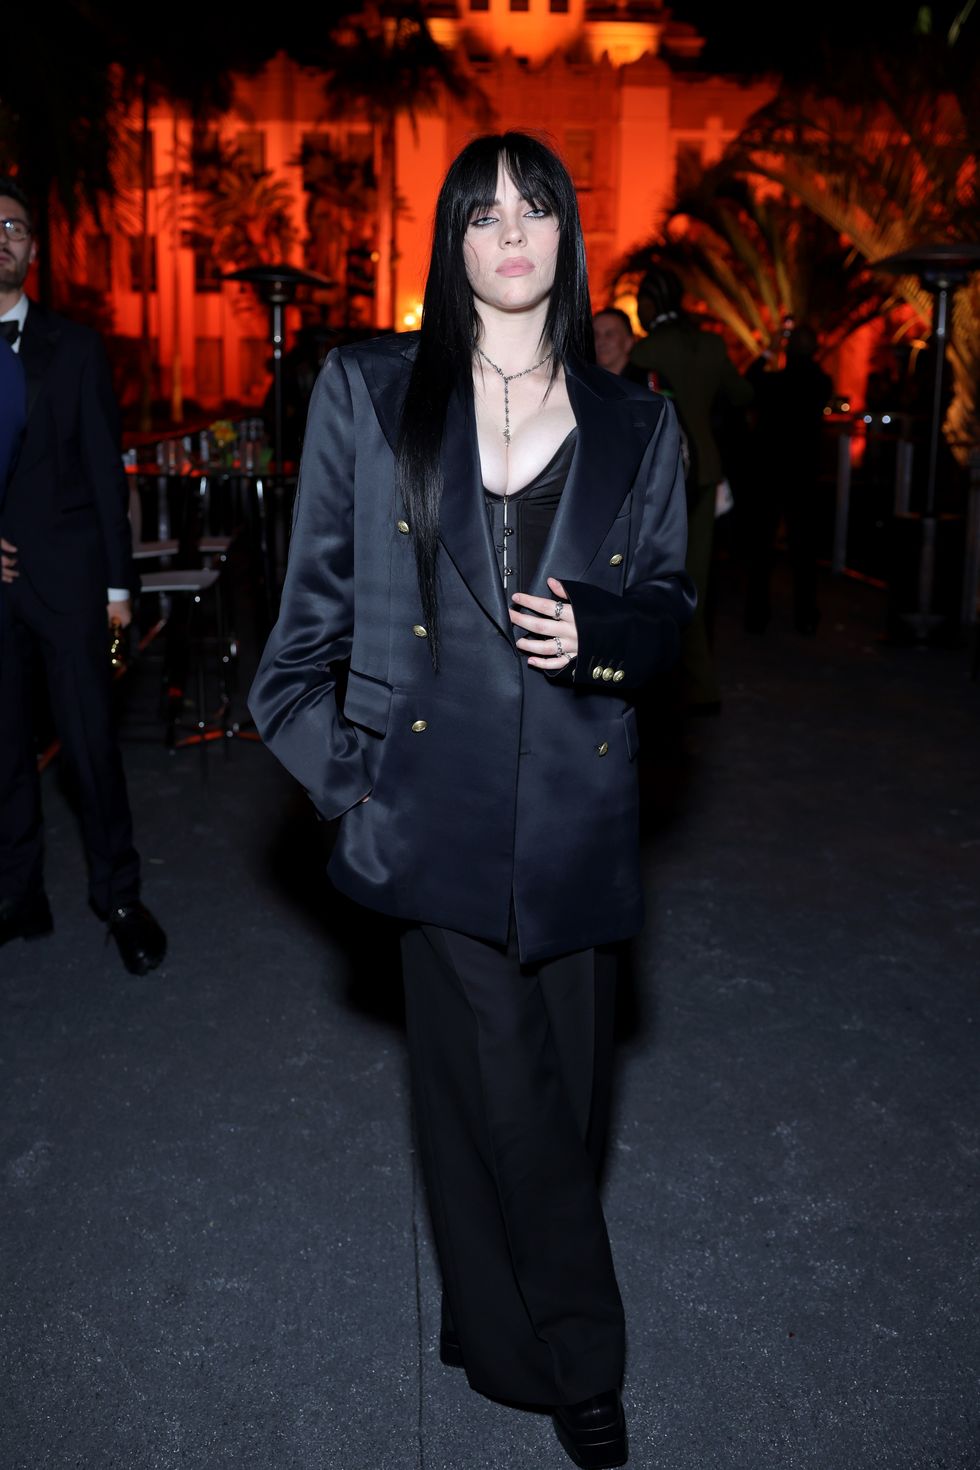 Billie Eilish Wore a Black Satin Suit to the Oscars AfterParty